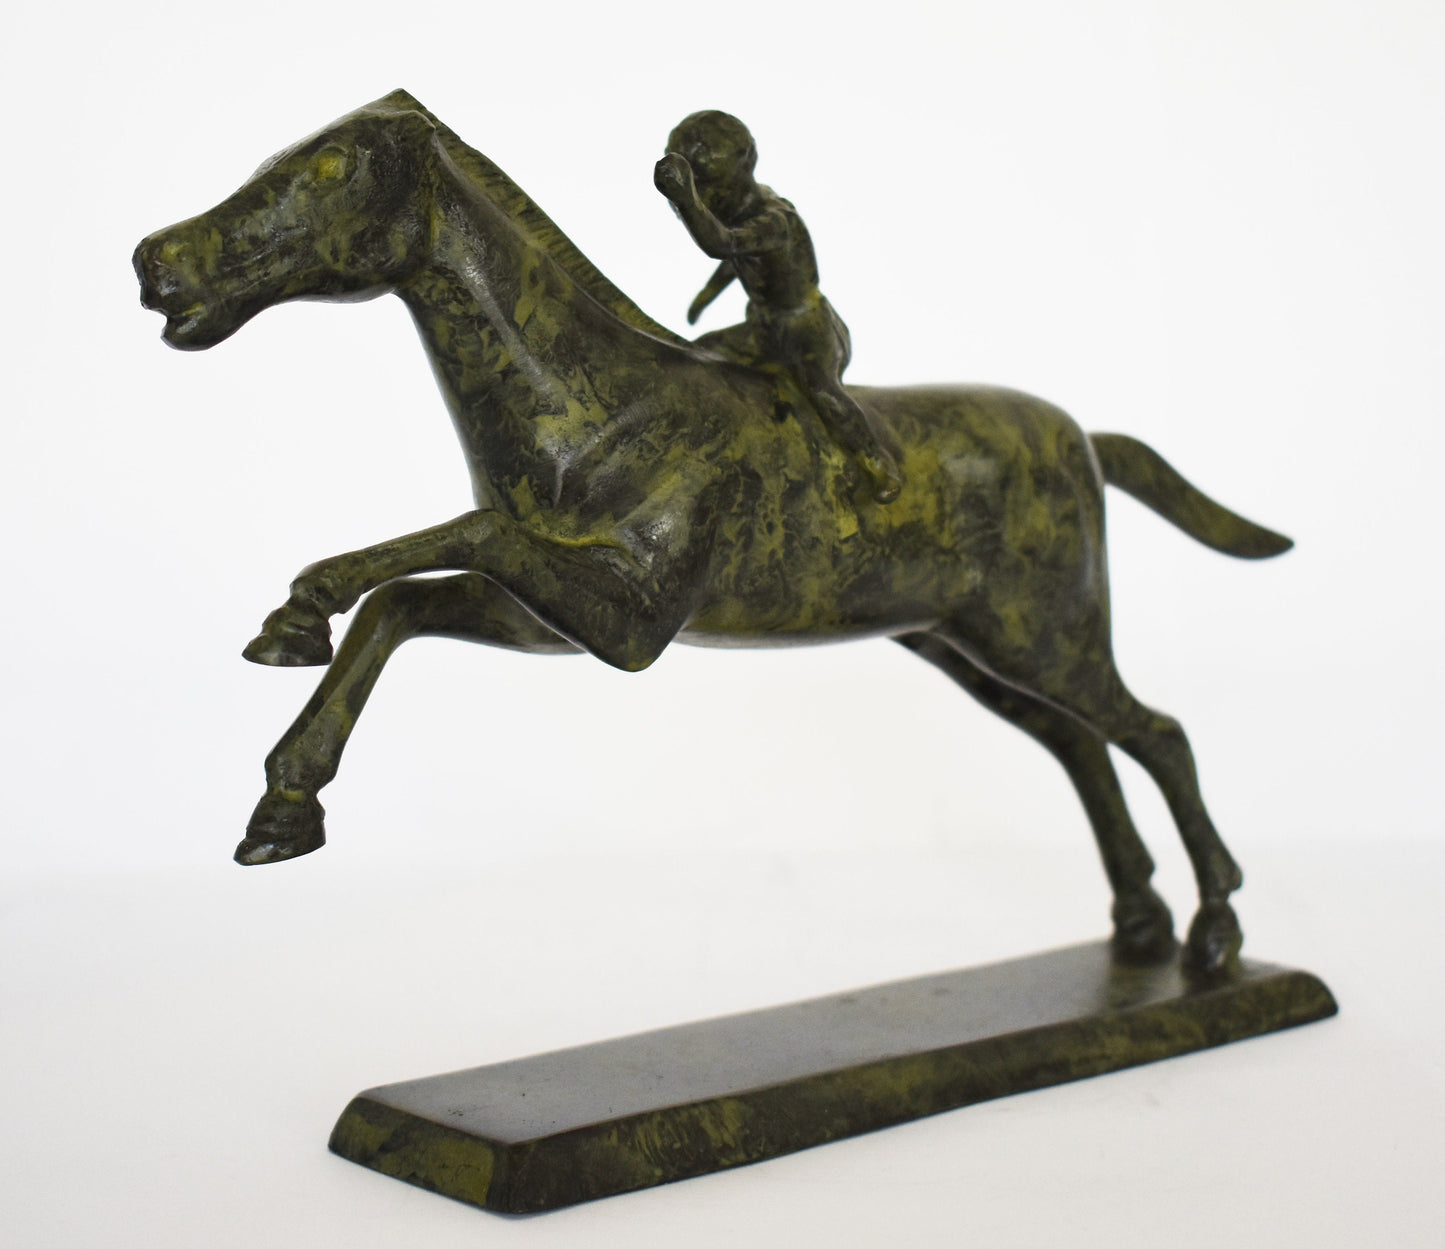 Jockey of Artemision  - Hellenistic Period, 150–140 BC - Athens National museum - Reproduction - Pure Bronze Sculpture